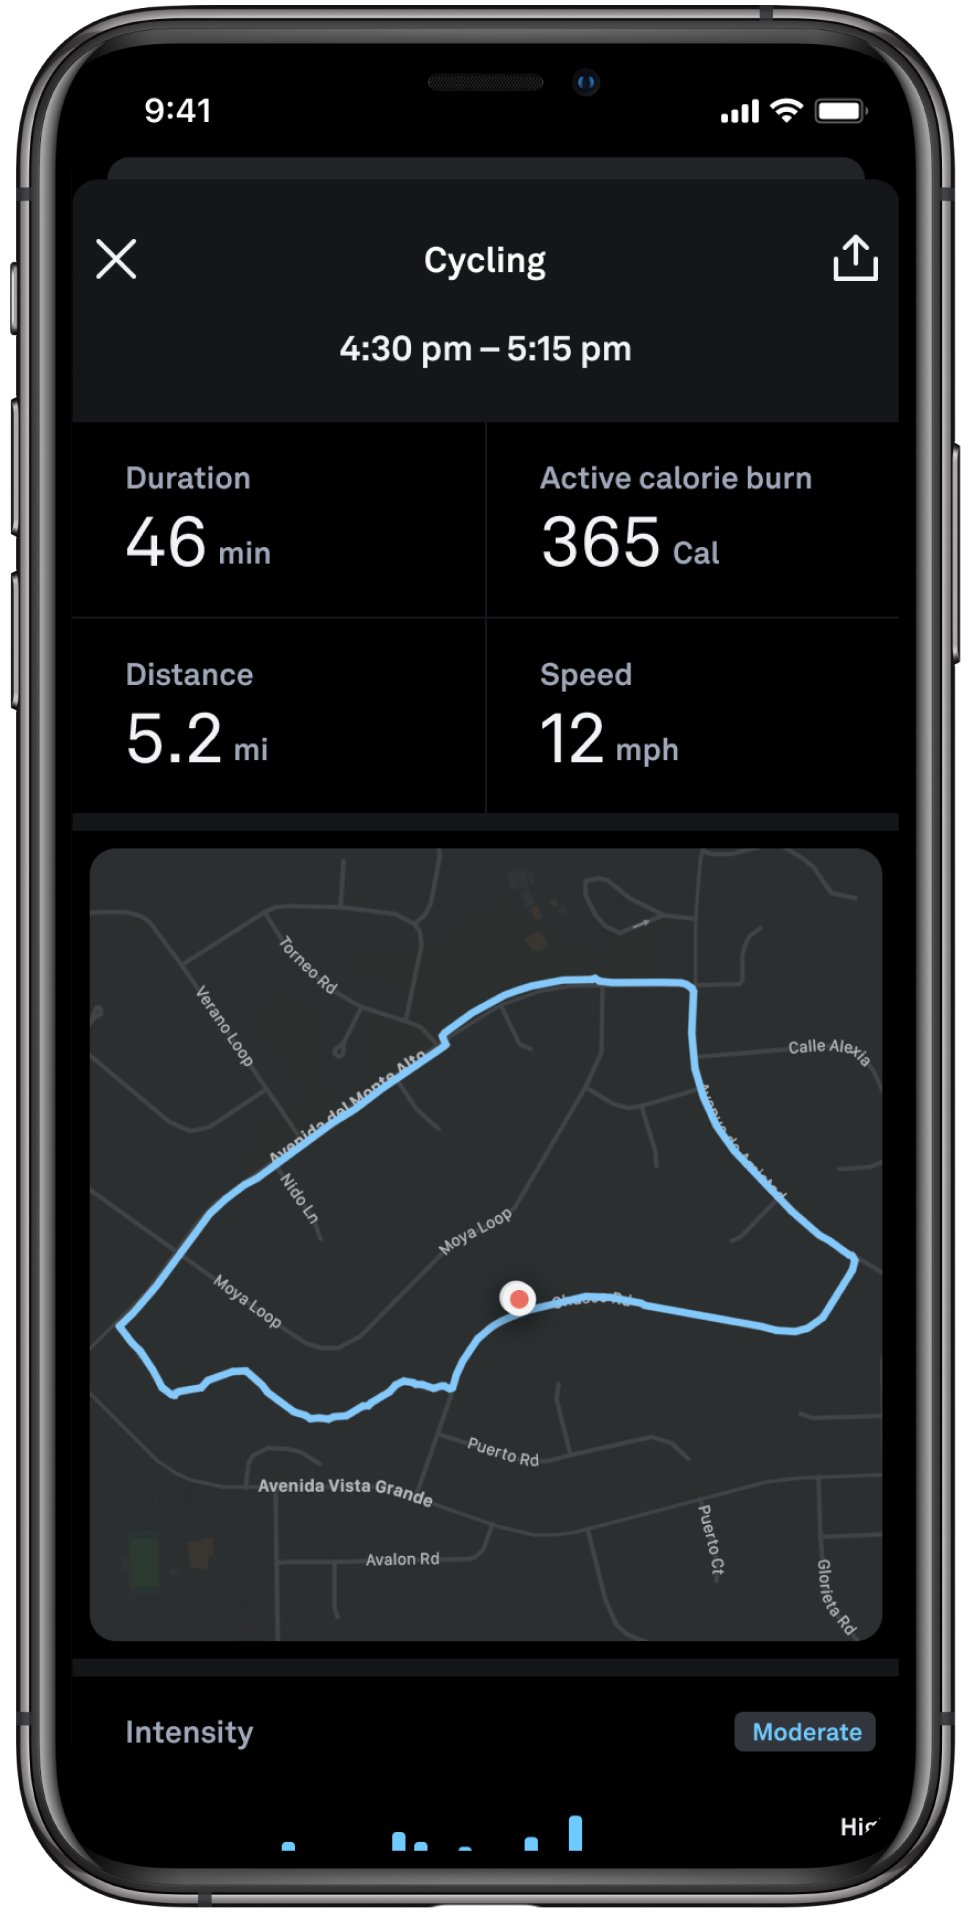 a picture of a phone. the phone's screen displays details of a cycling workout including: time, duration, active calorie burn, distance, speed, and a map of the route taken